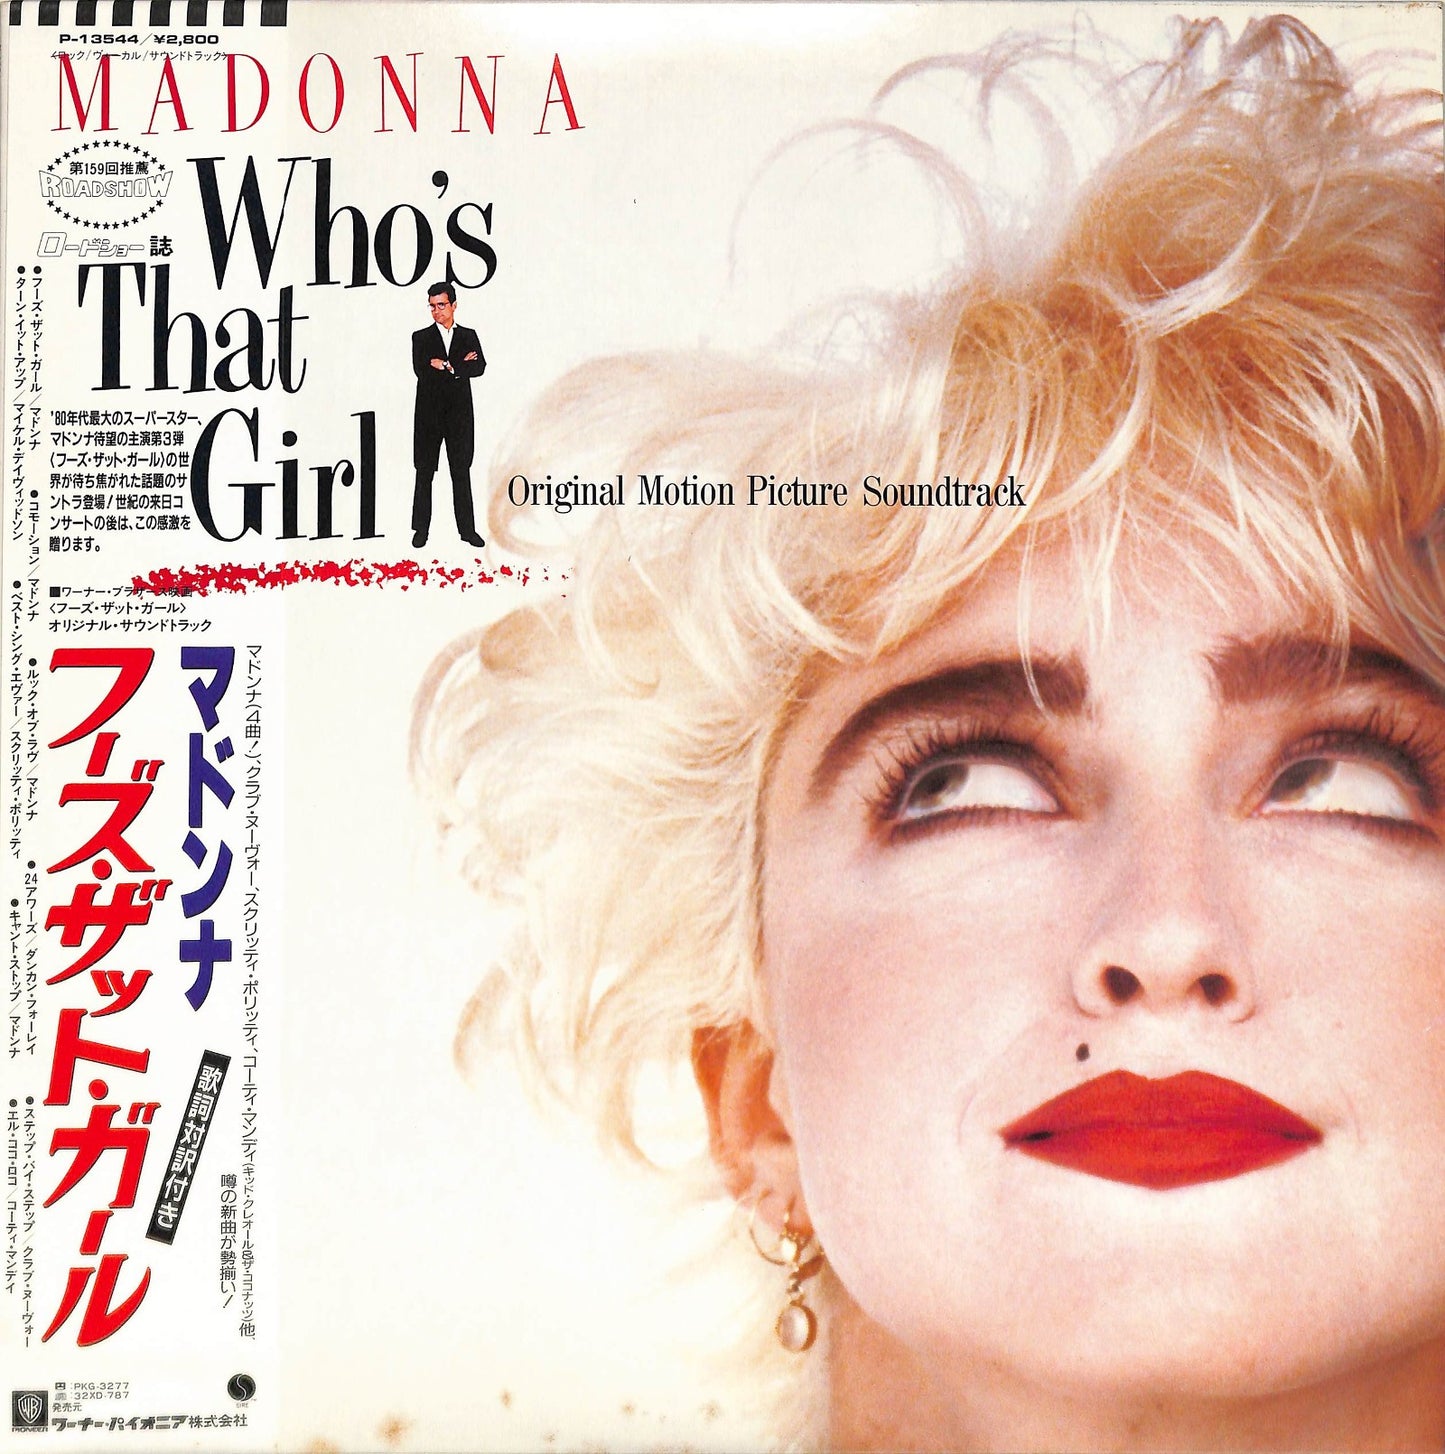 MADONNA - Who's That Girl (Original Motion Picture Soundtrack)